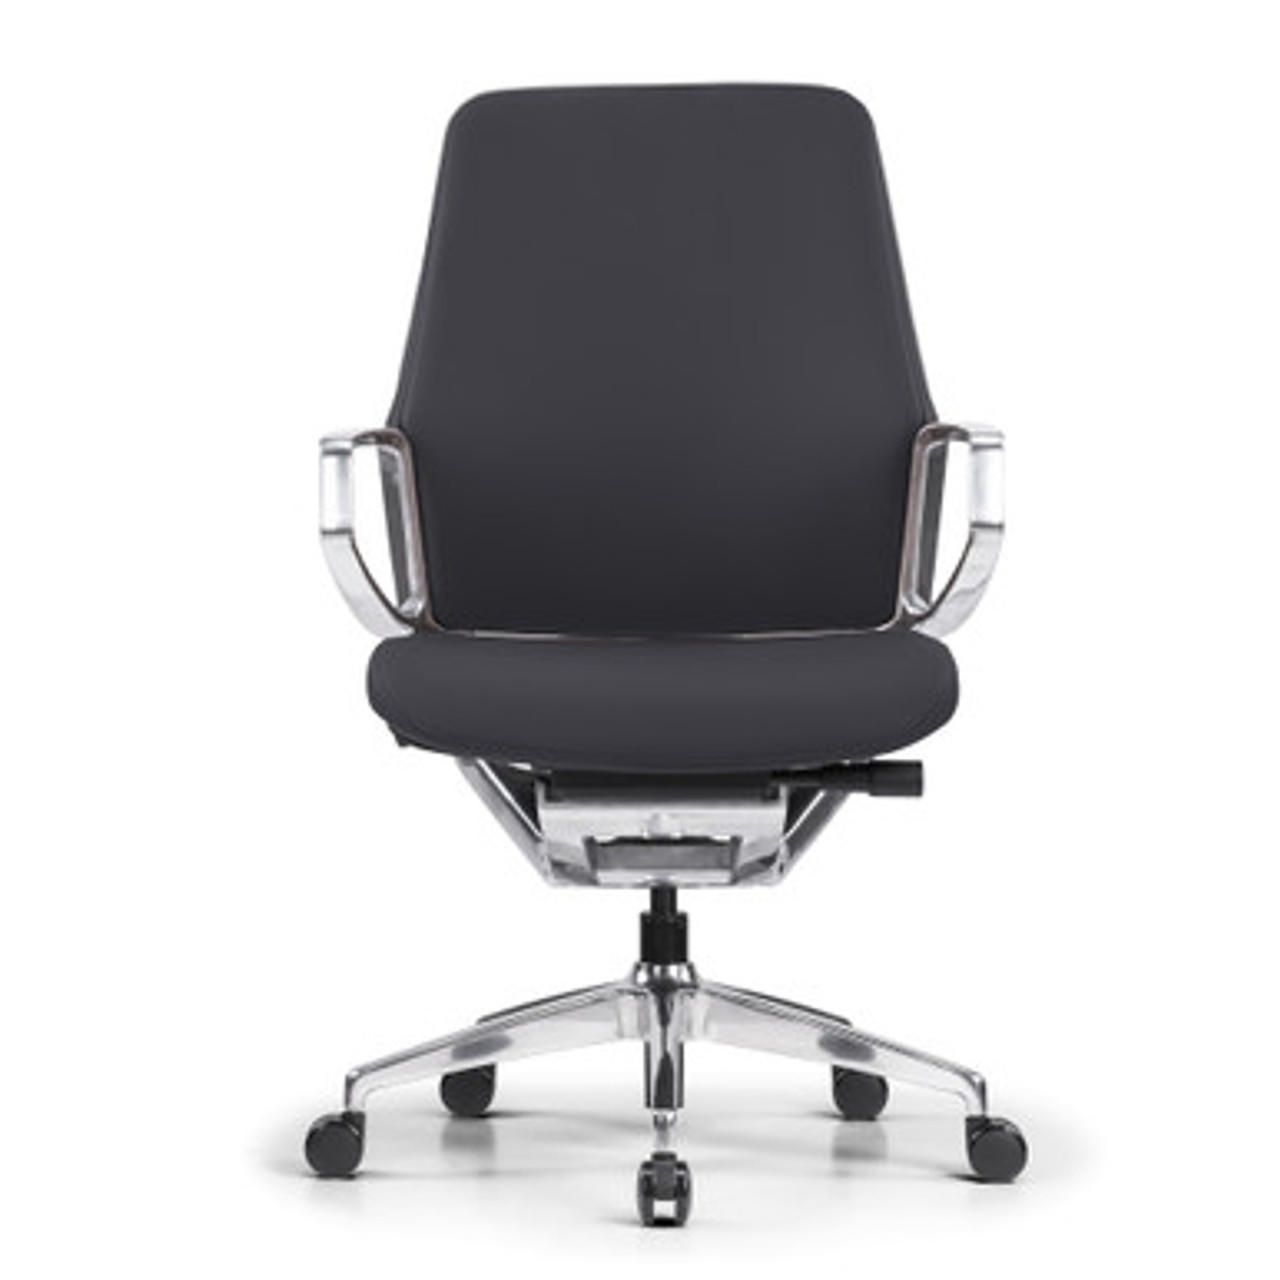  Office Source Veneto Executive Mid-Back Chair with Polished Aluminum Frame 301ML 